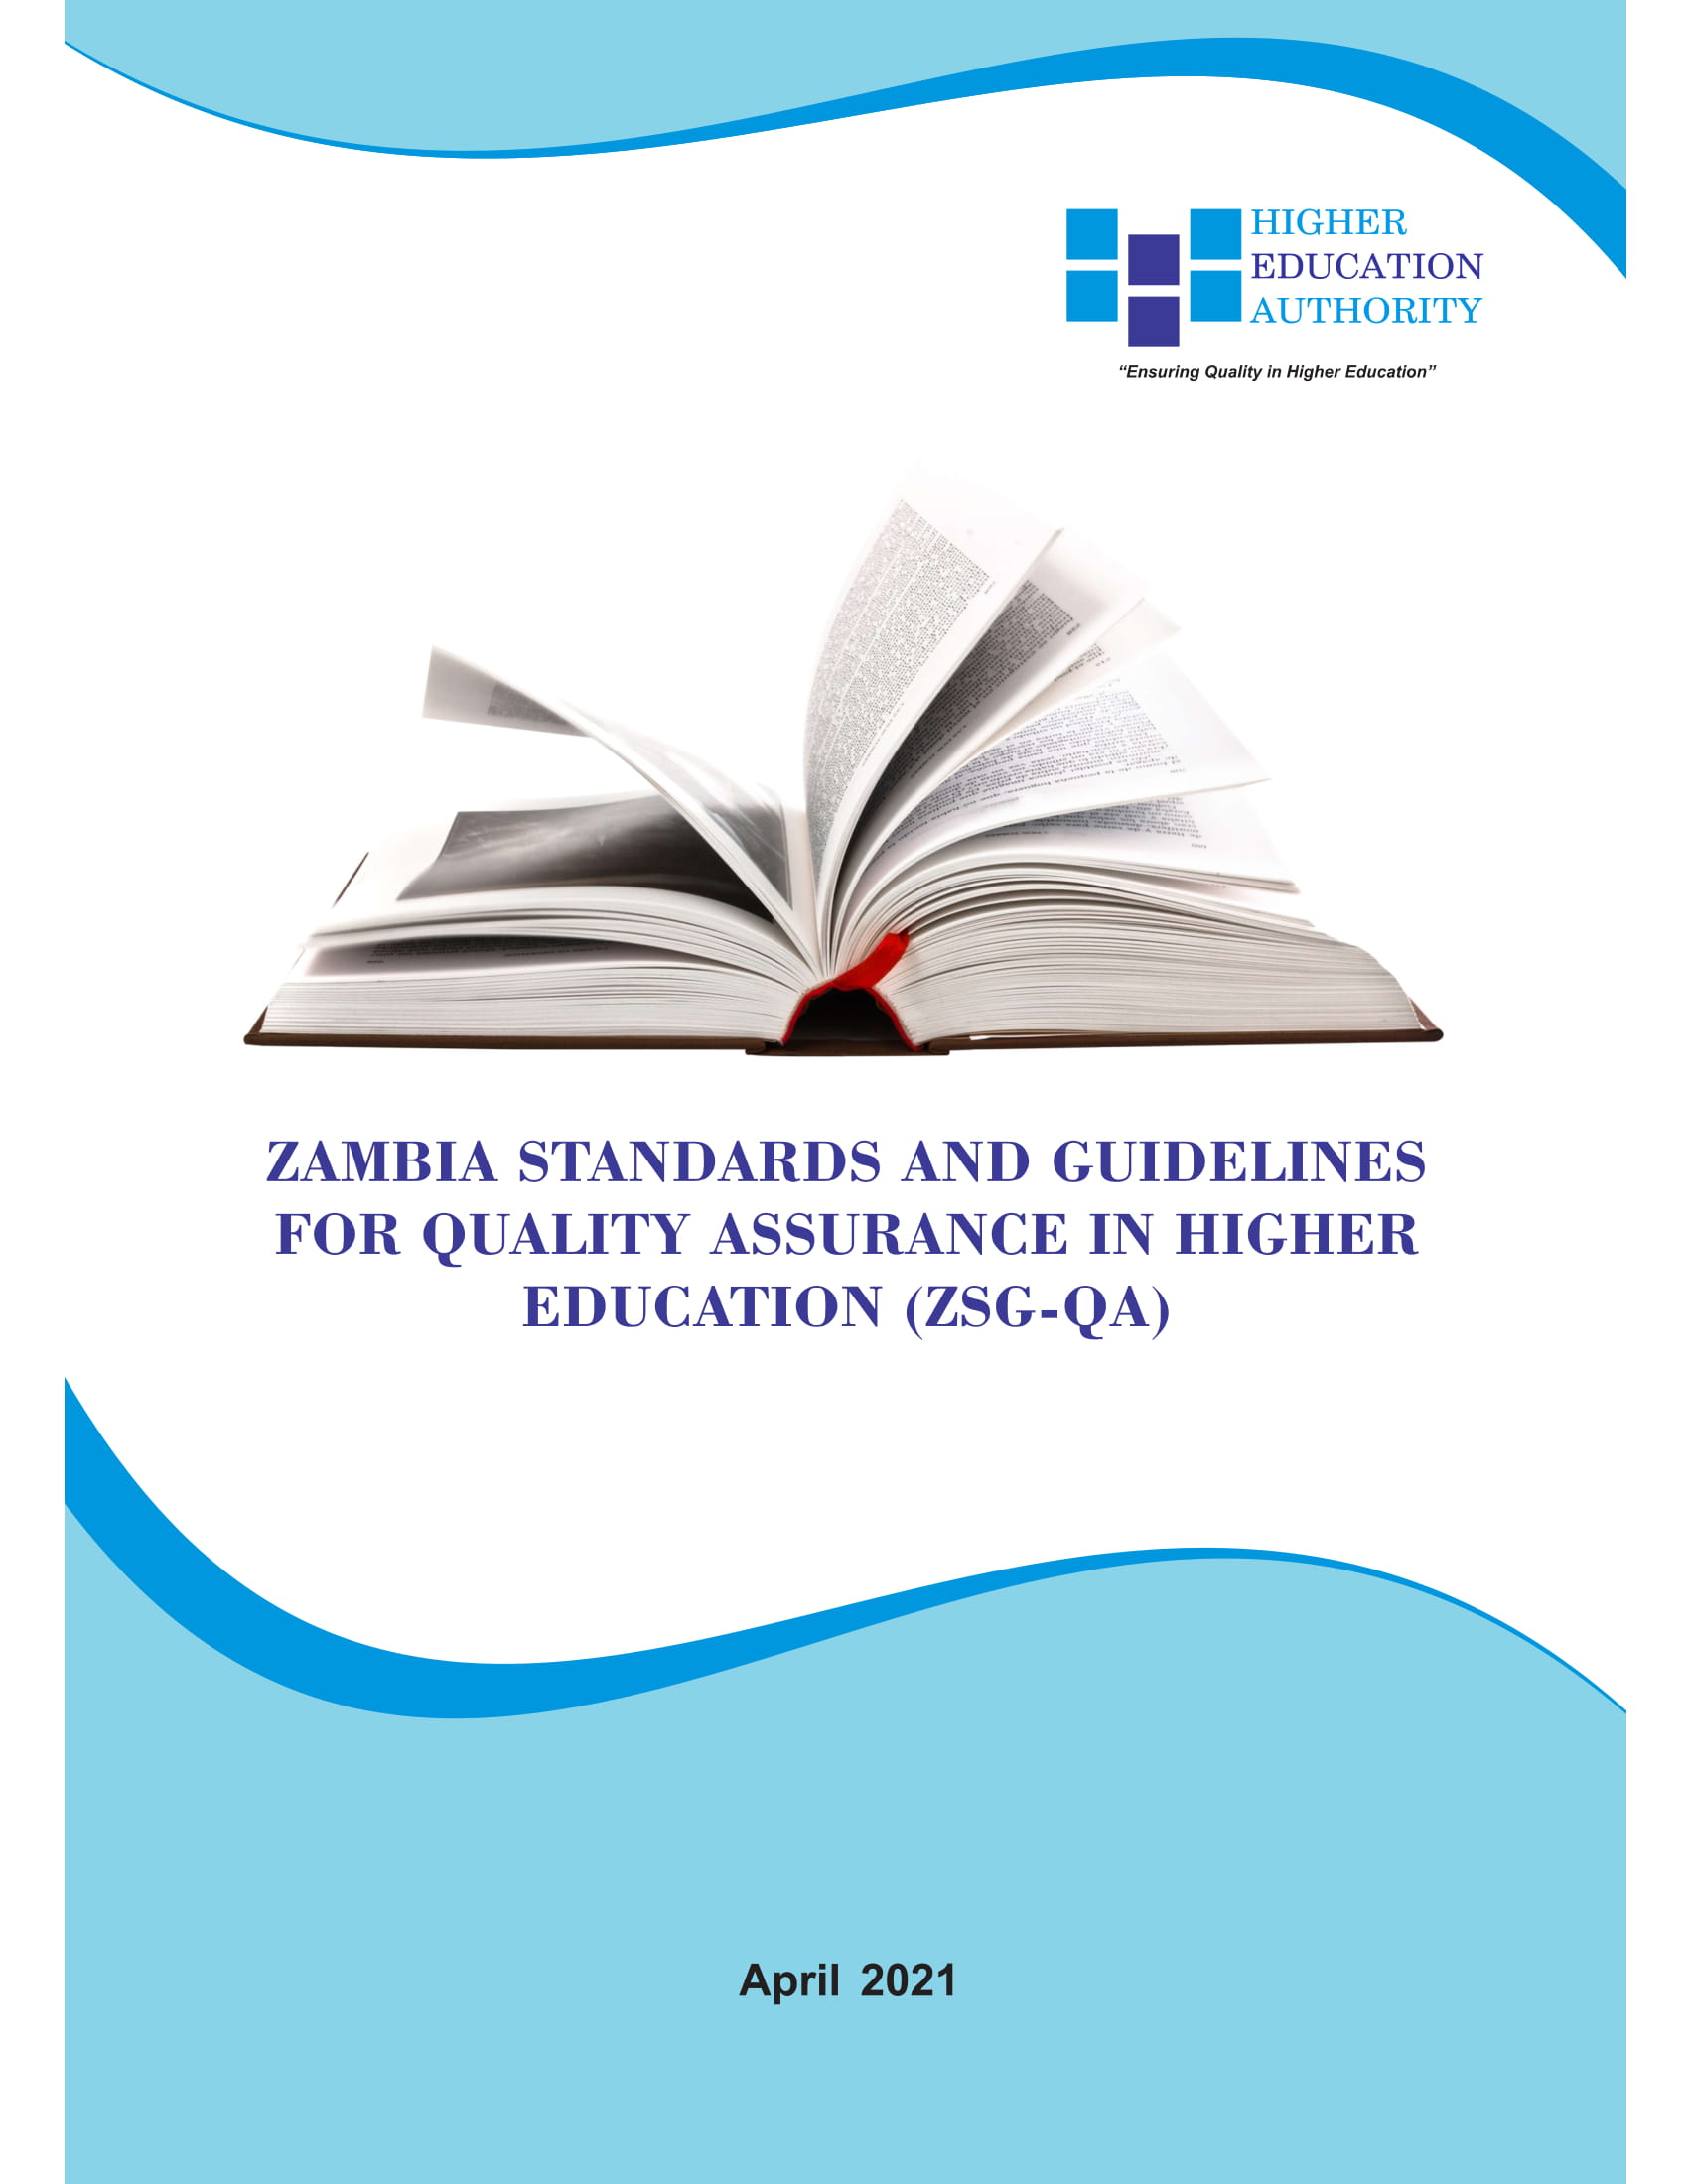 Zambia Standards and Guidelines for Quality Assurance in Higher Education (ZSG-QA)